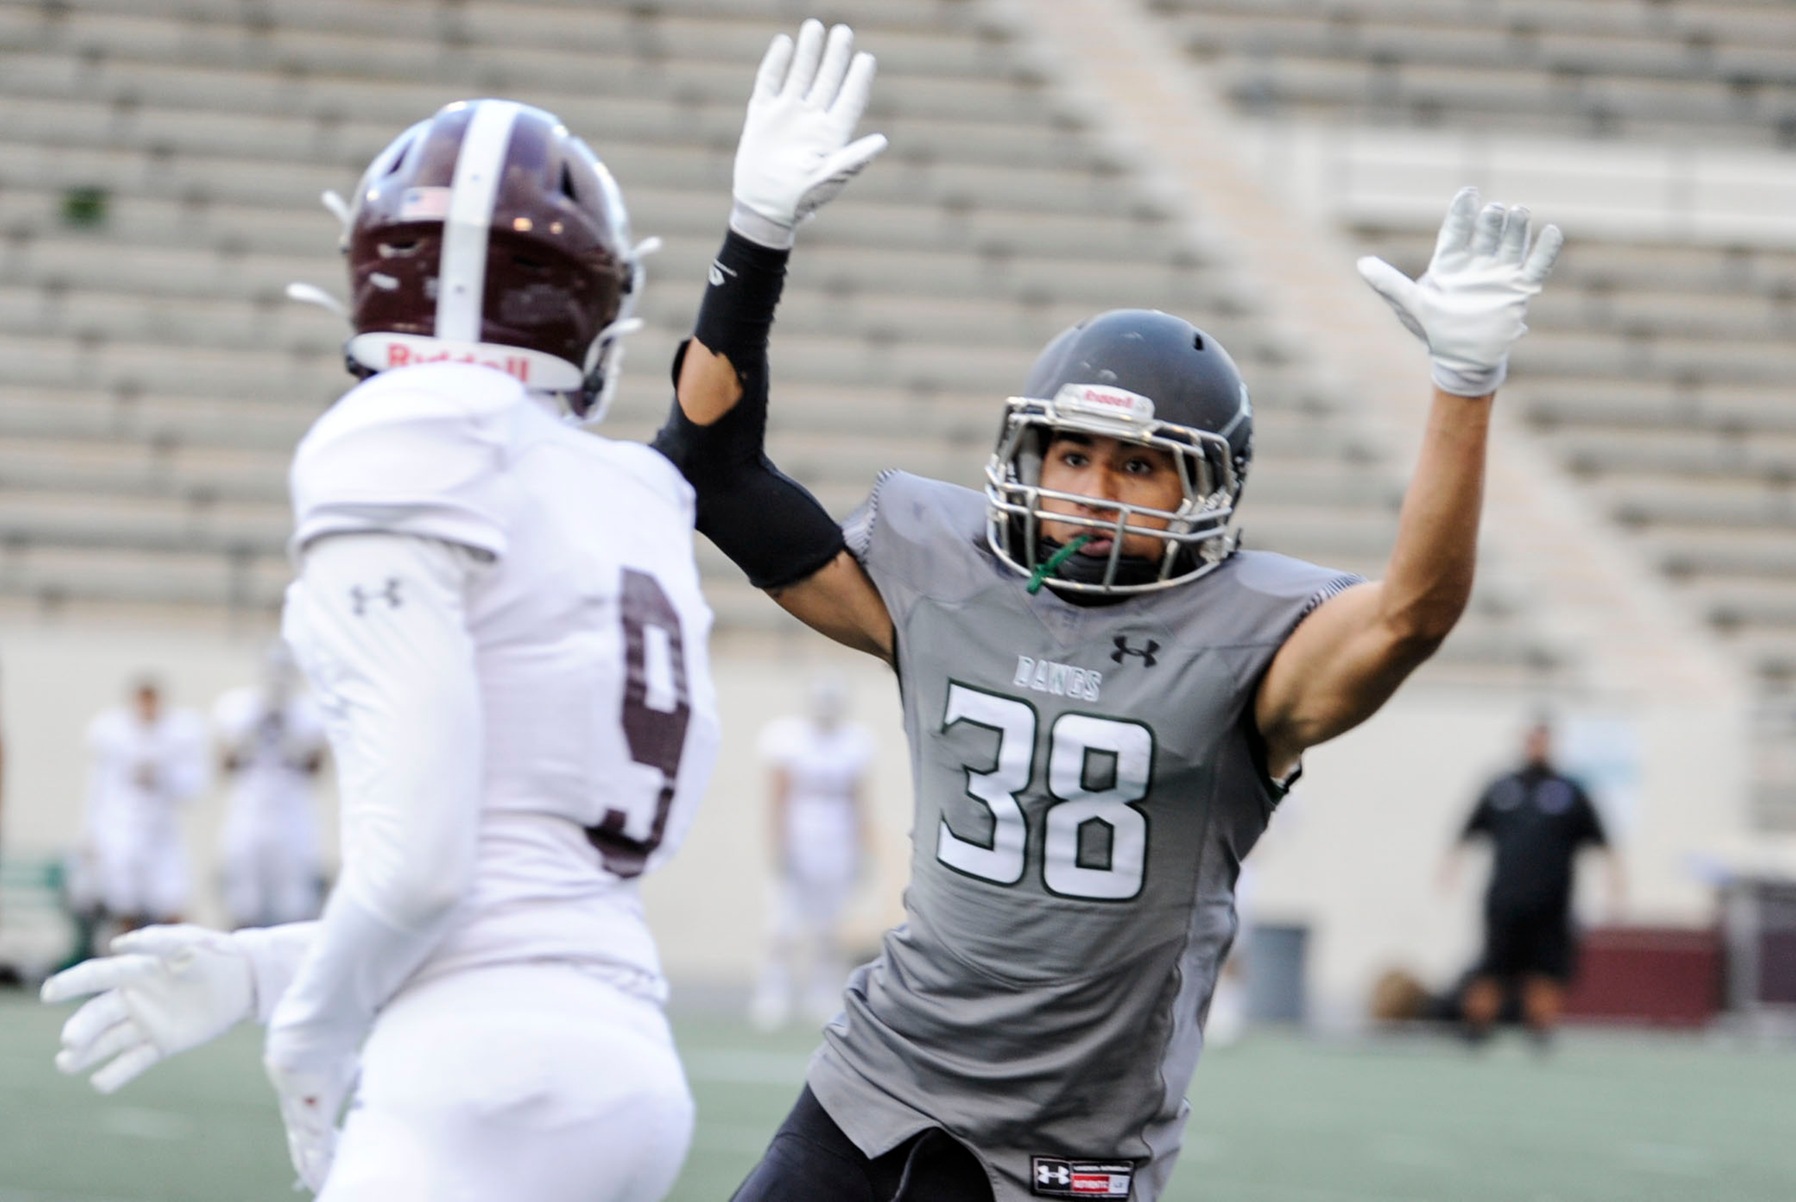 ELAC Misses Opportunities, Fall to Mt. SAC